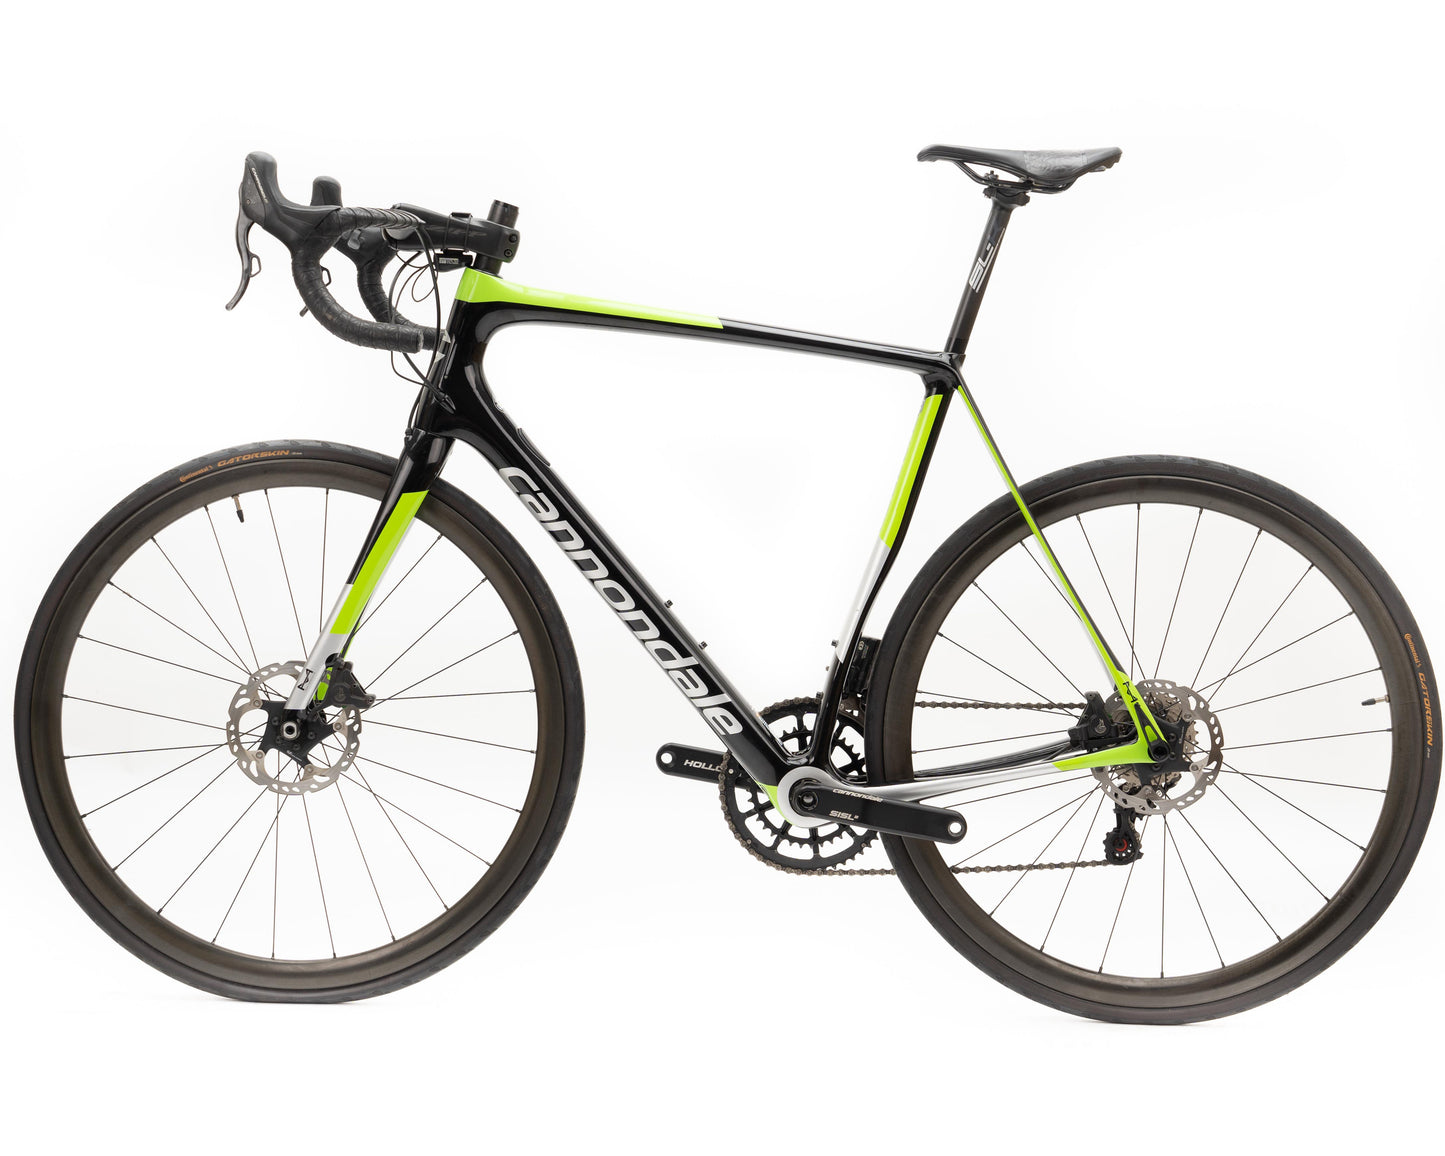 2018 Cannondale Synapse Blk/Grn 58 (Pre-Owned)